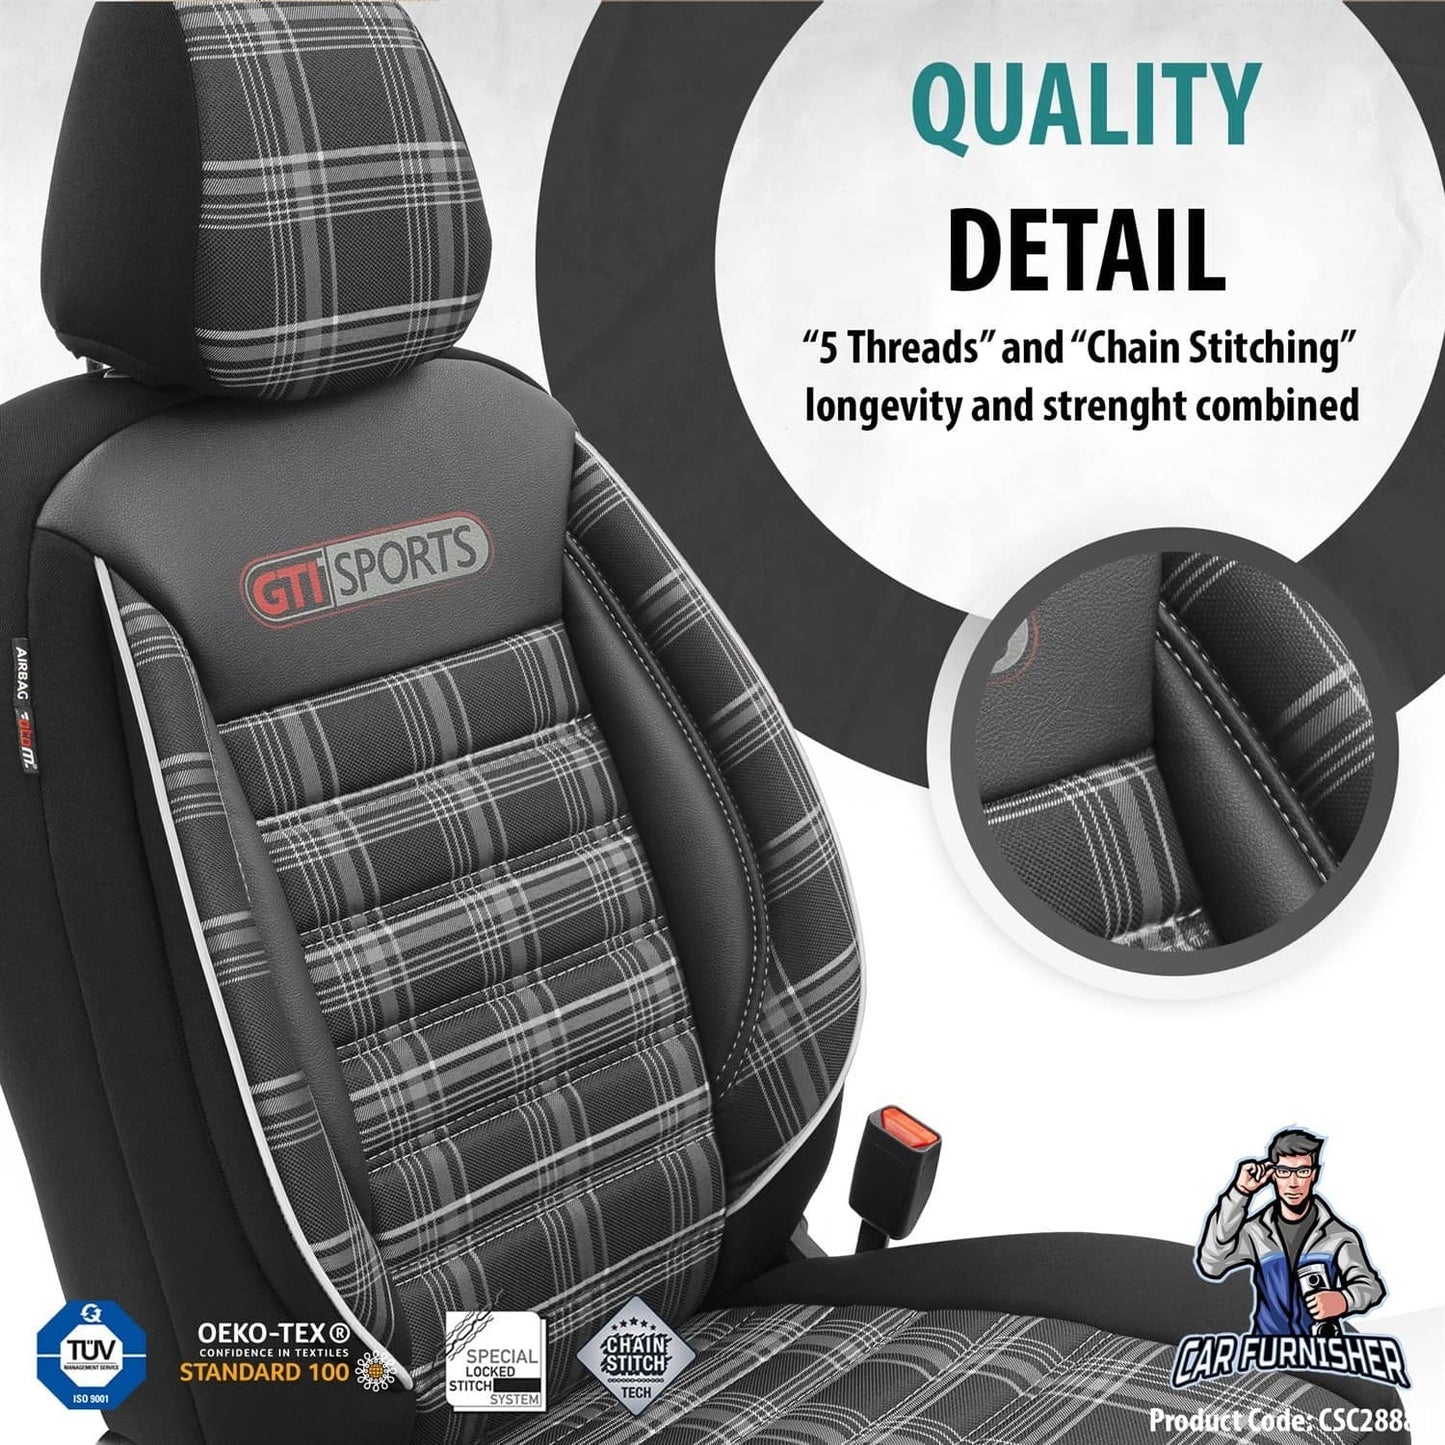 VW Golf GTI Car Seat Covers MK4/MK5/MK6/MK7 1998-2020 Special Series Smoked Black 5 Seats + Headrests (Full Set) Leather & Fabric